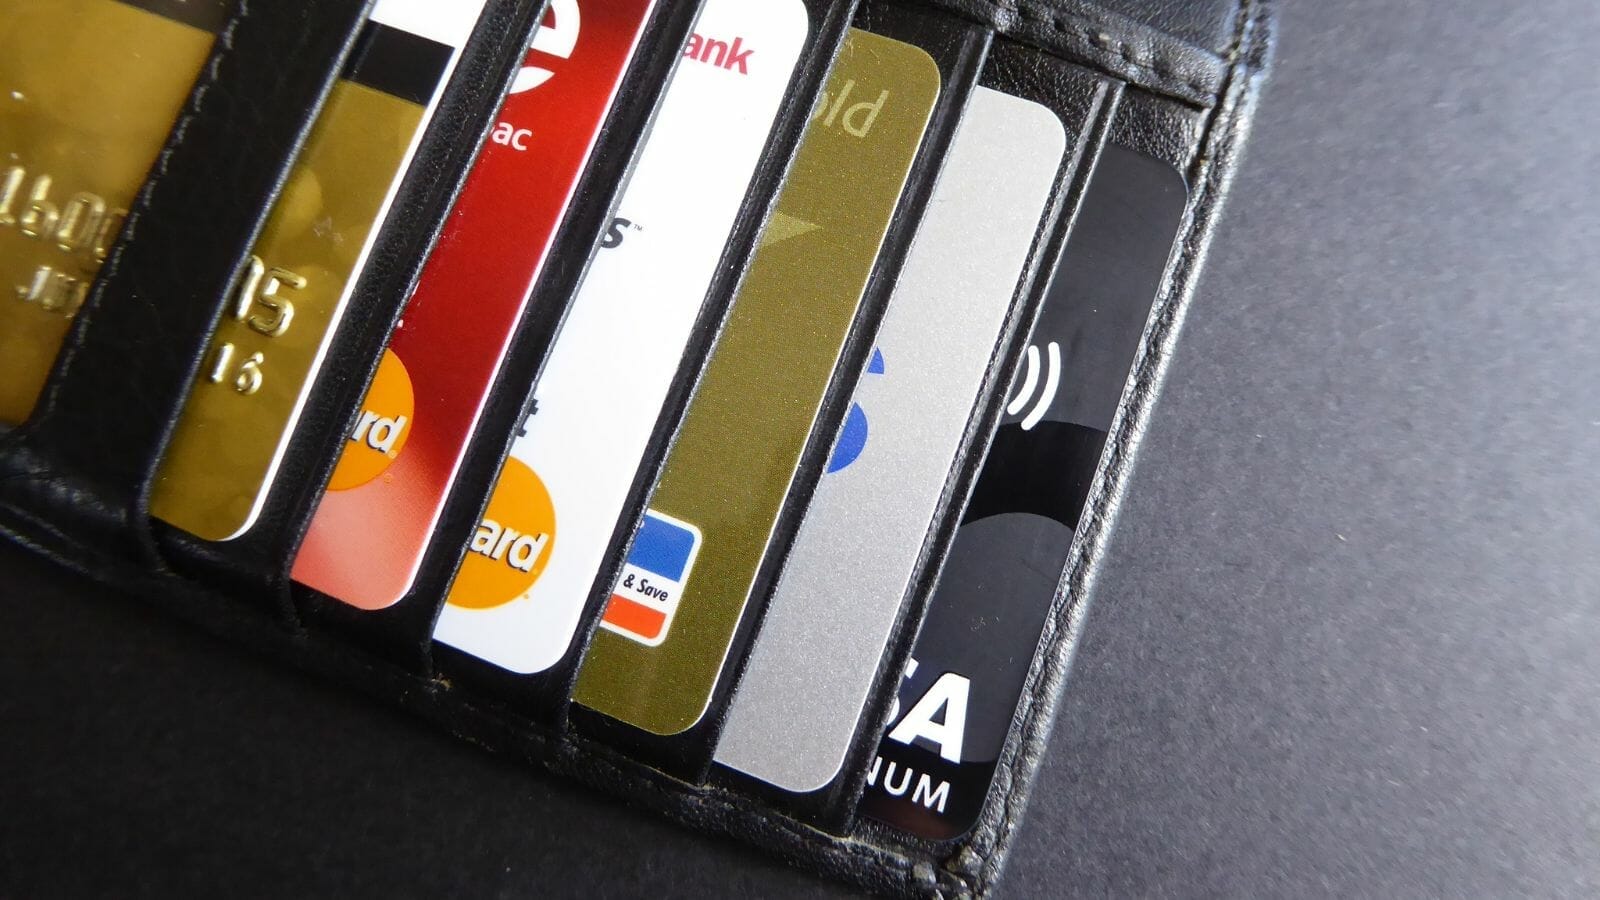 A close-up of several credit cards

